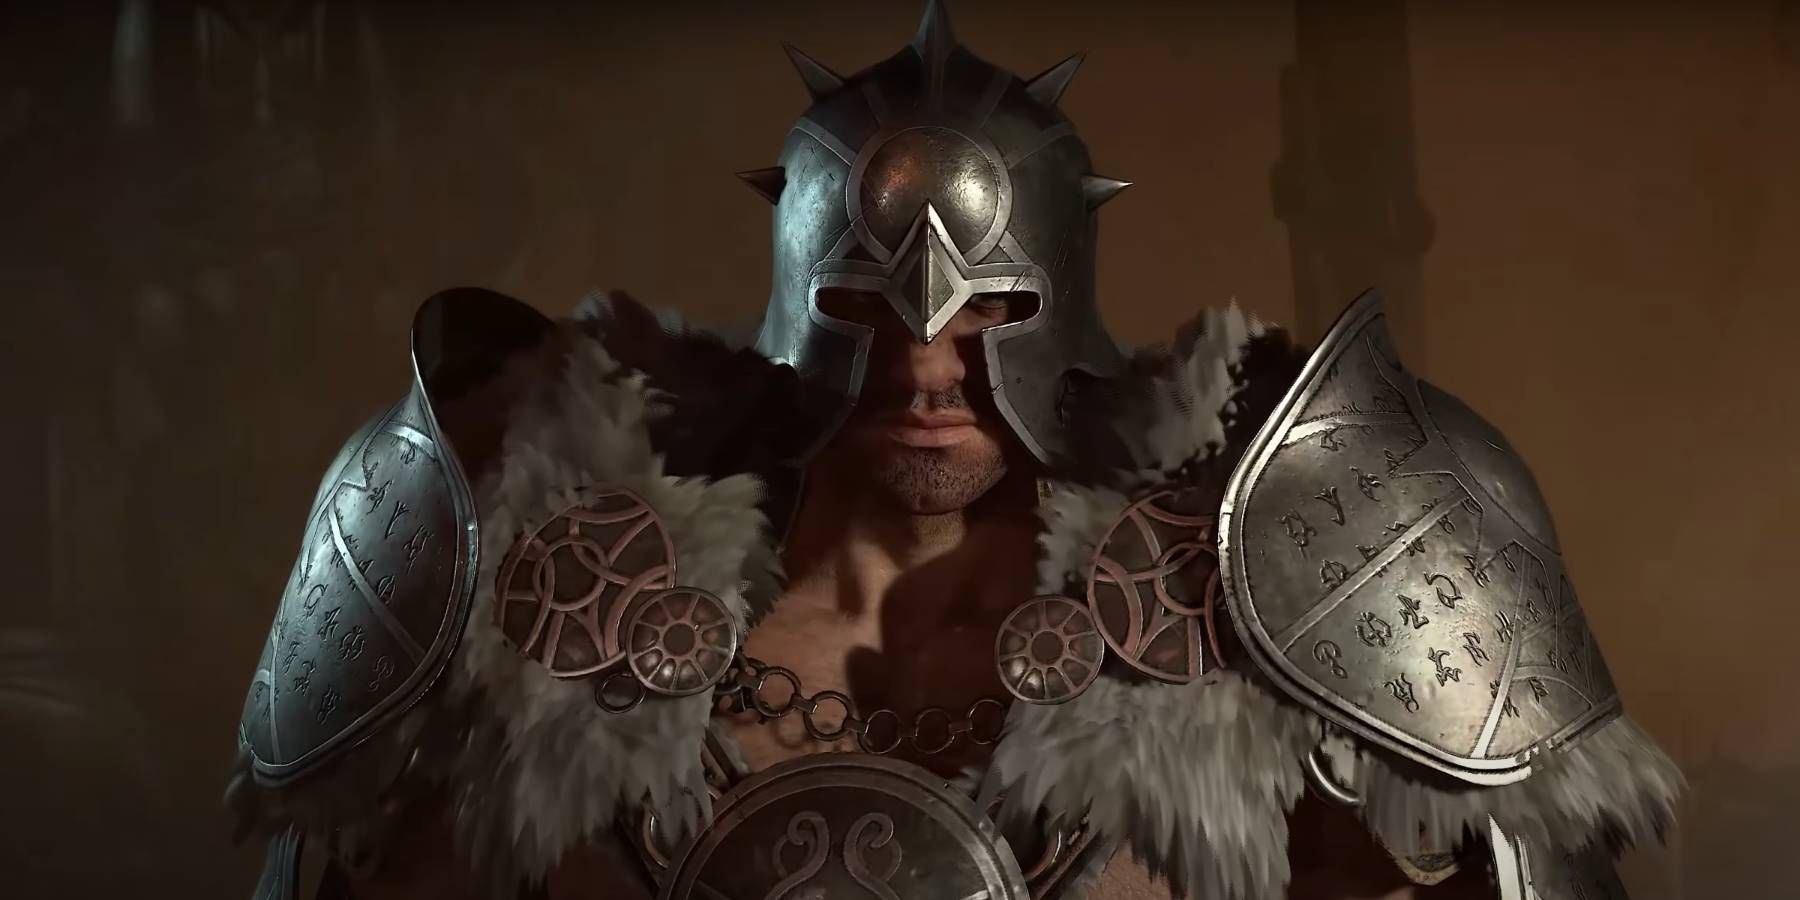 Diablo 4 Barbarian Armor Legendary Gear Outfit with Different Aspects Assigned from Codex of Power